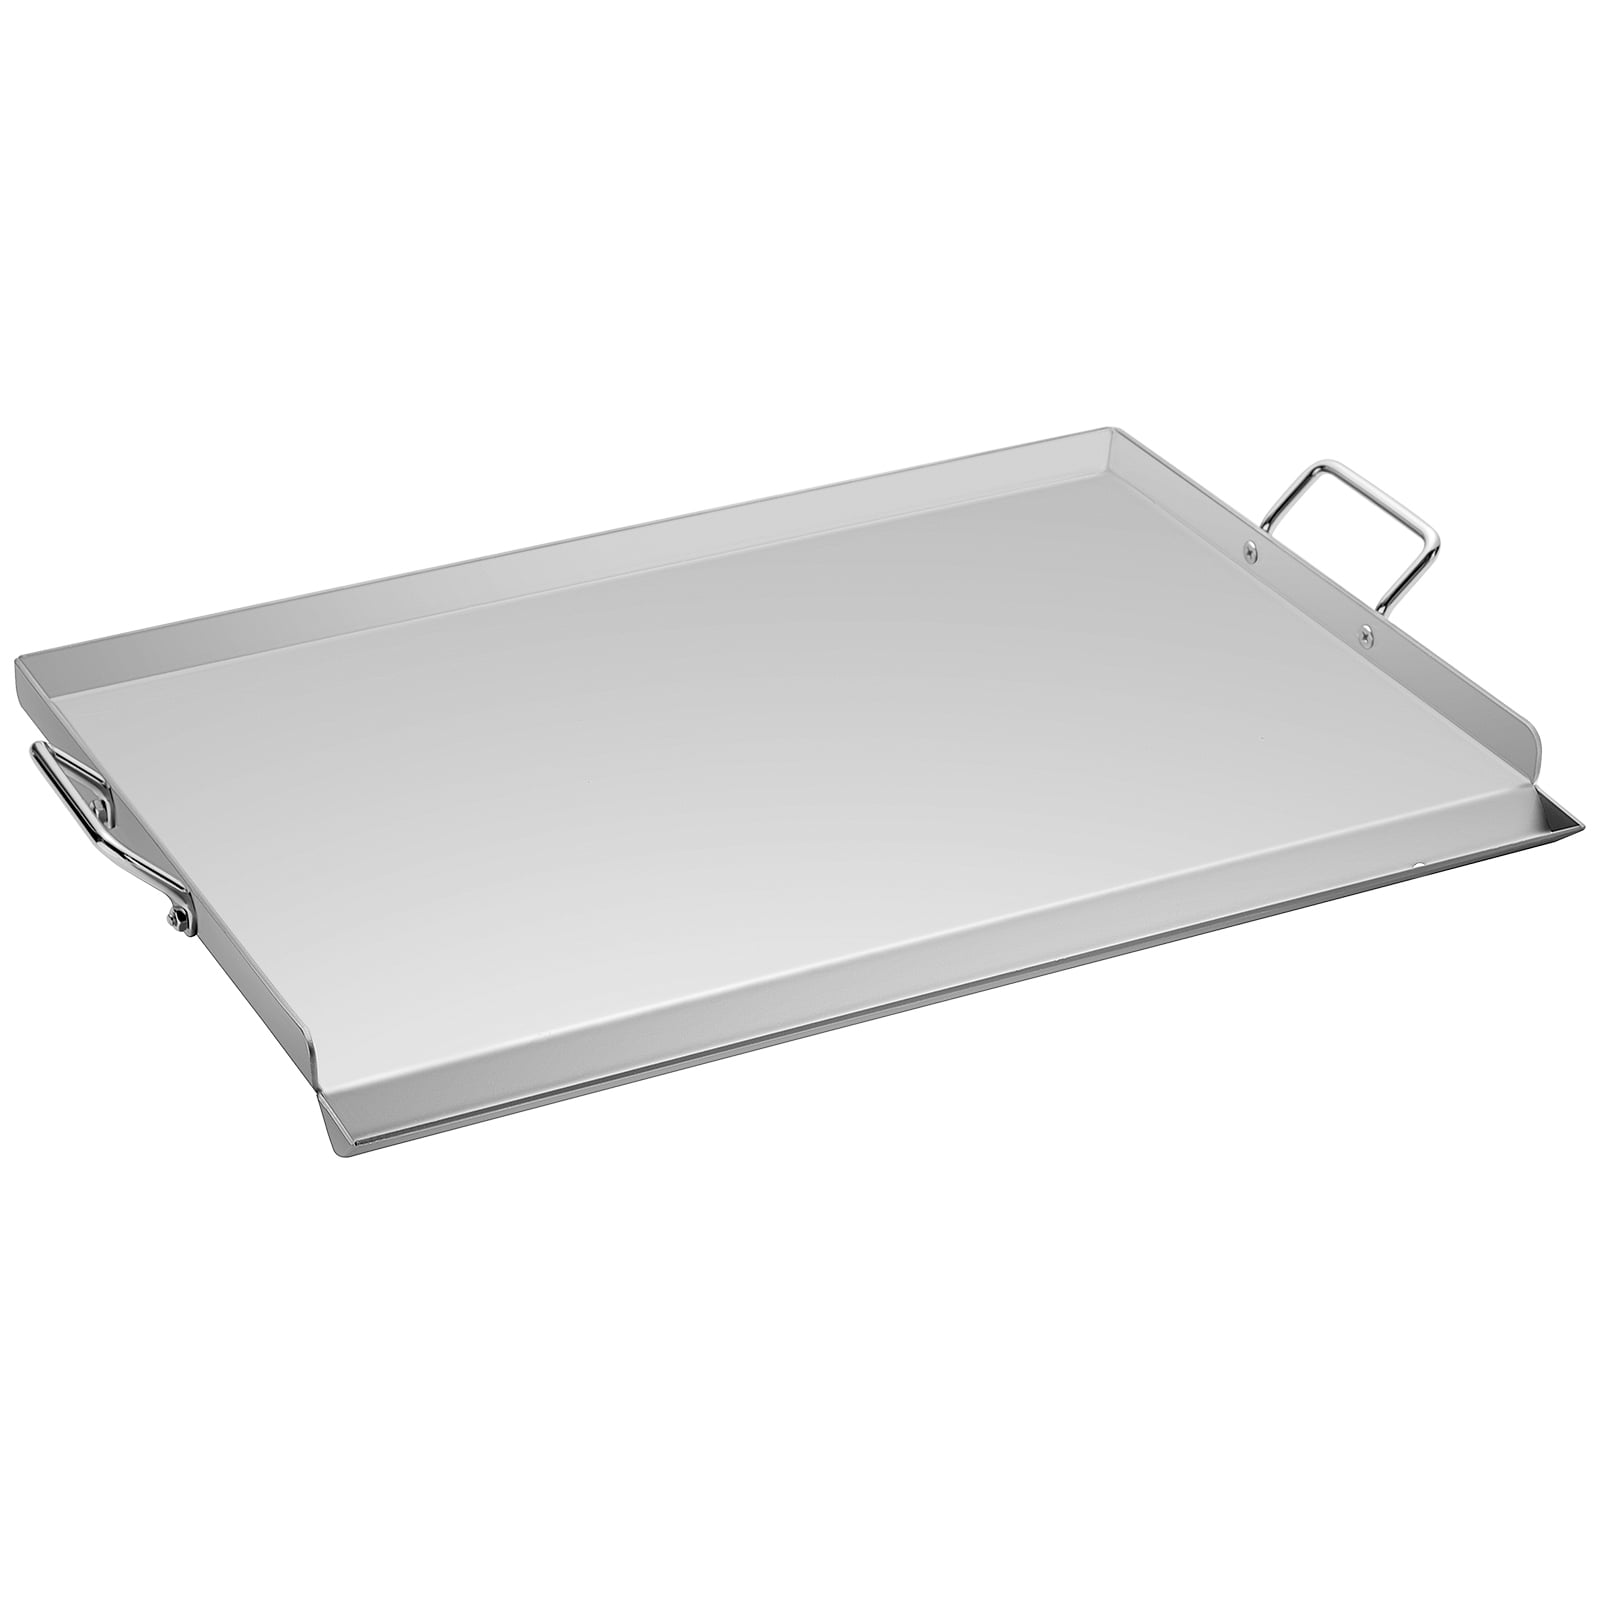 Stainless Steel Flat Top Comal Plancha 18x16 inch BBQ Griddle for cooking  with Outdoors Stove or Grill catering - KITCHEN & RESTAURANT SUPPLIES